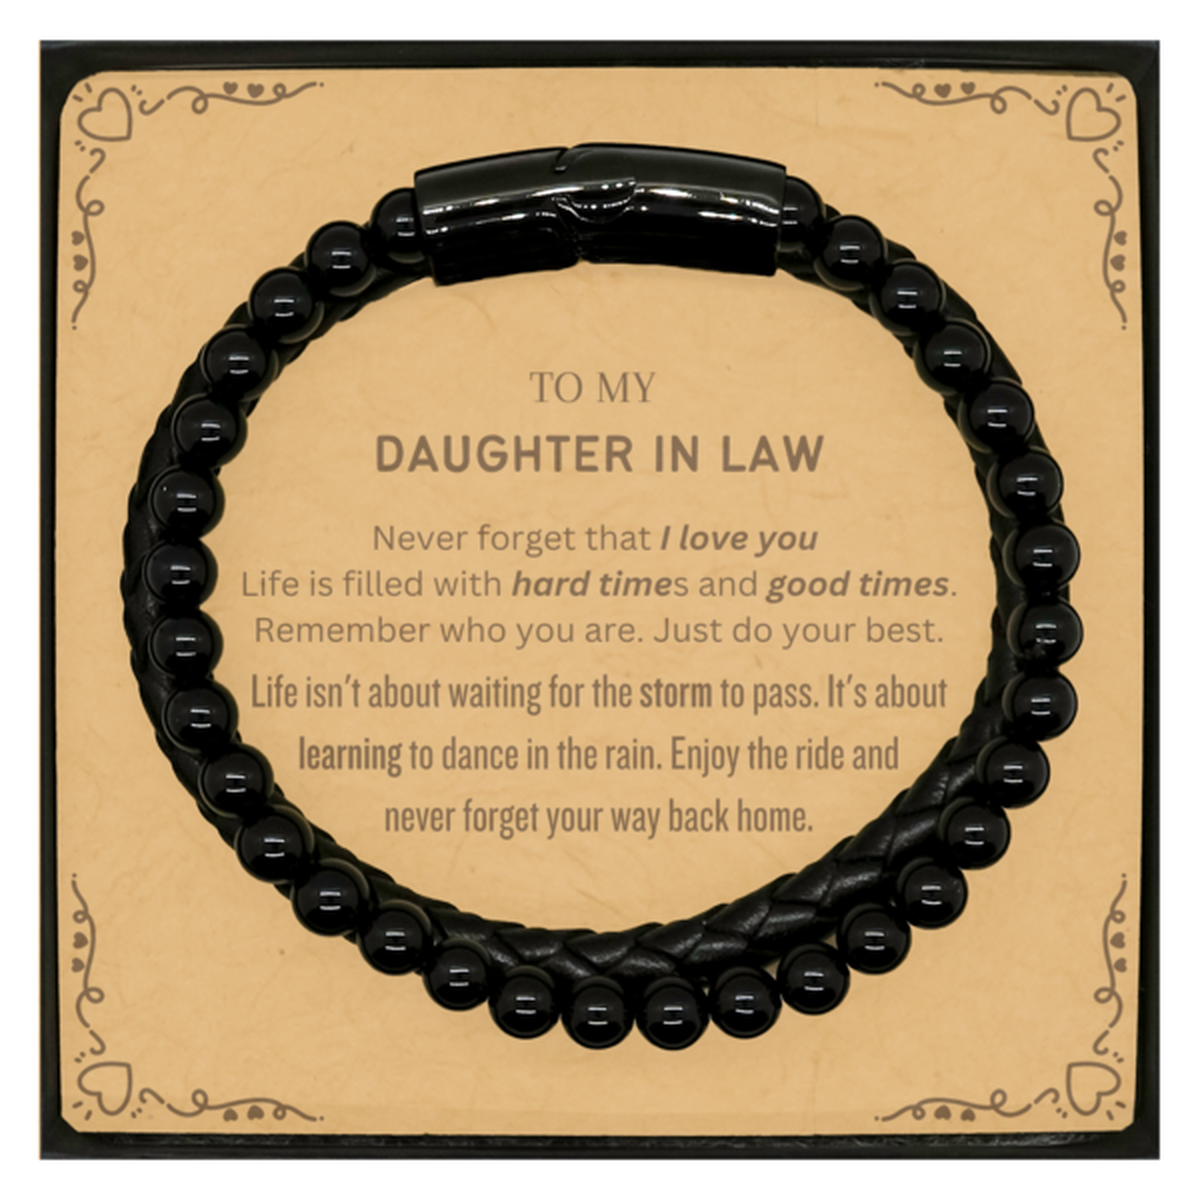 Christmas Daughter In Law Stone Leather Bracelets Gifts, To My Daughter In Law Birthday Thank You Gifts For Daughter In Law, Graduation Unique Gifts For Daughter In Law To My Daughter In Law Never forget that I love you life is filled with hard times and